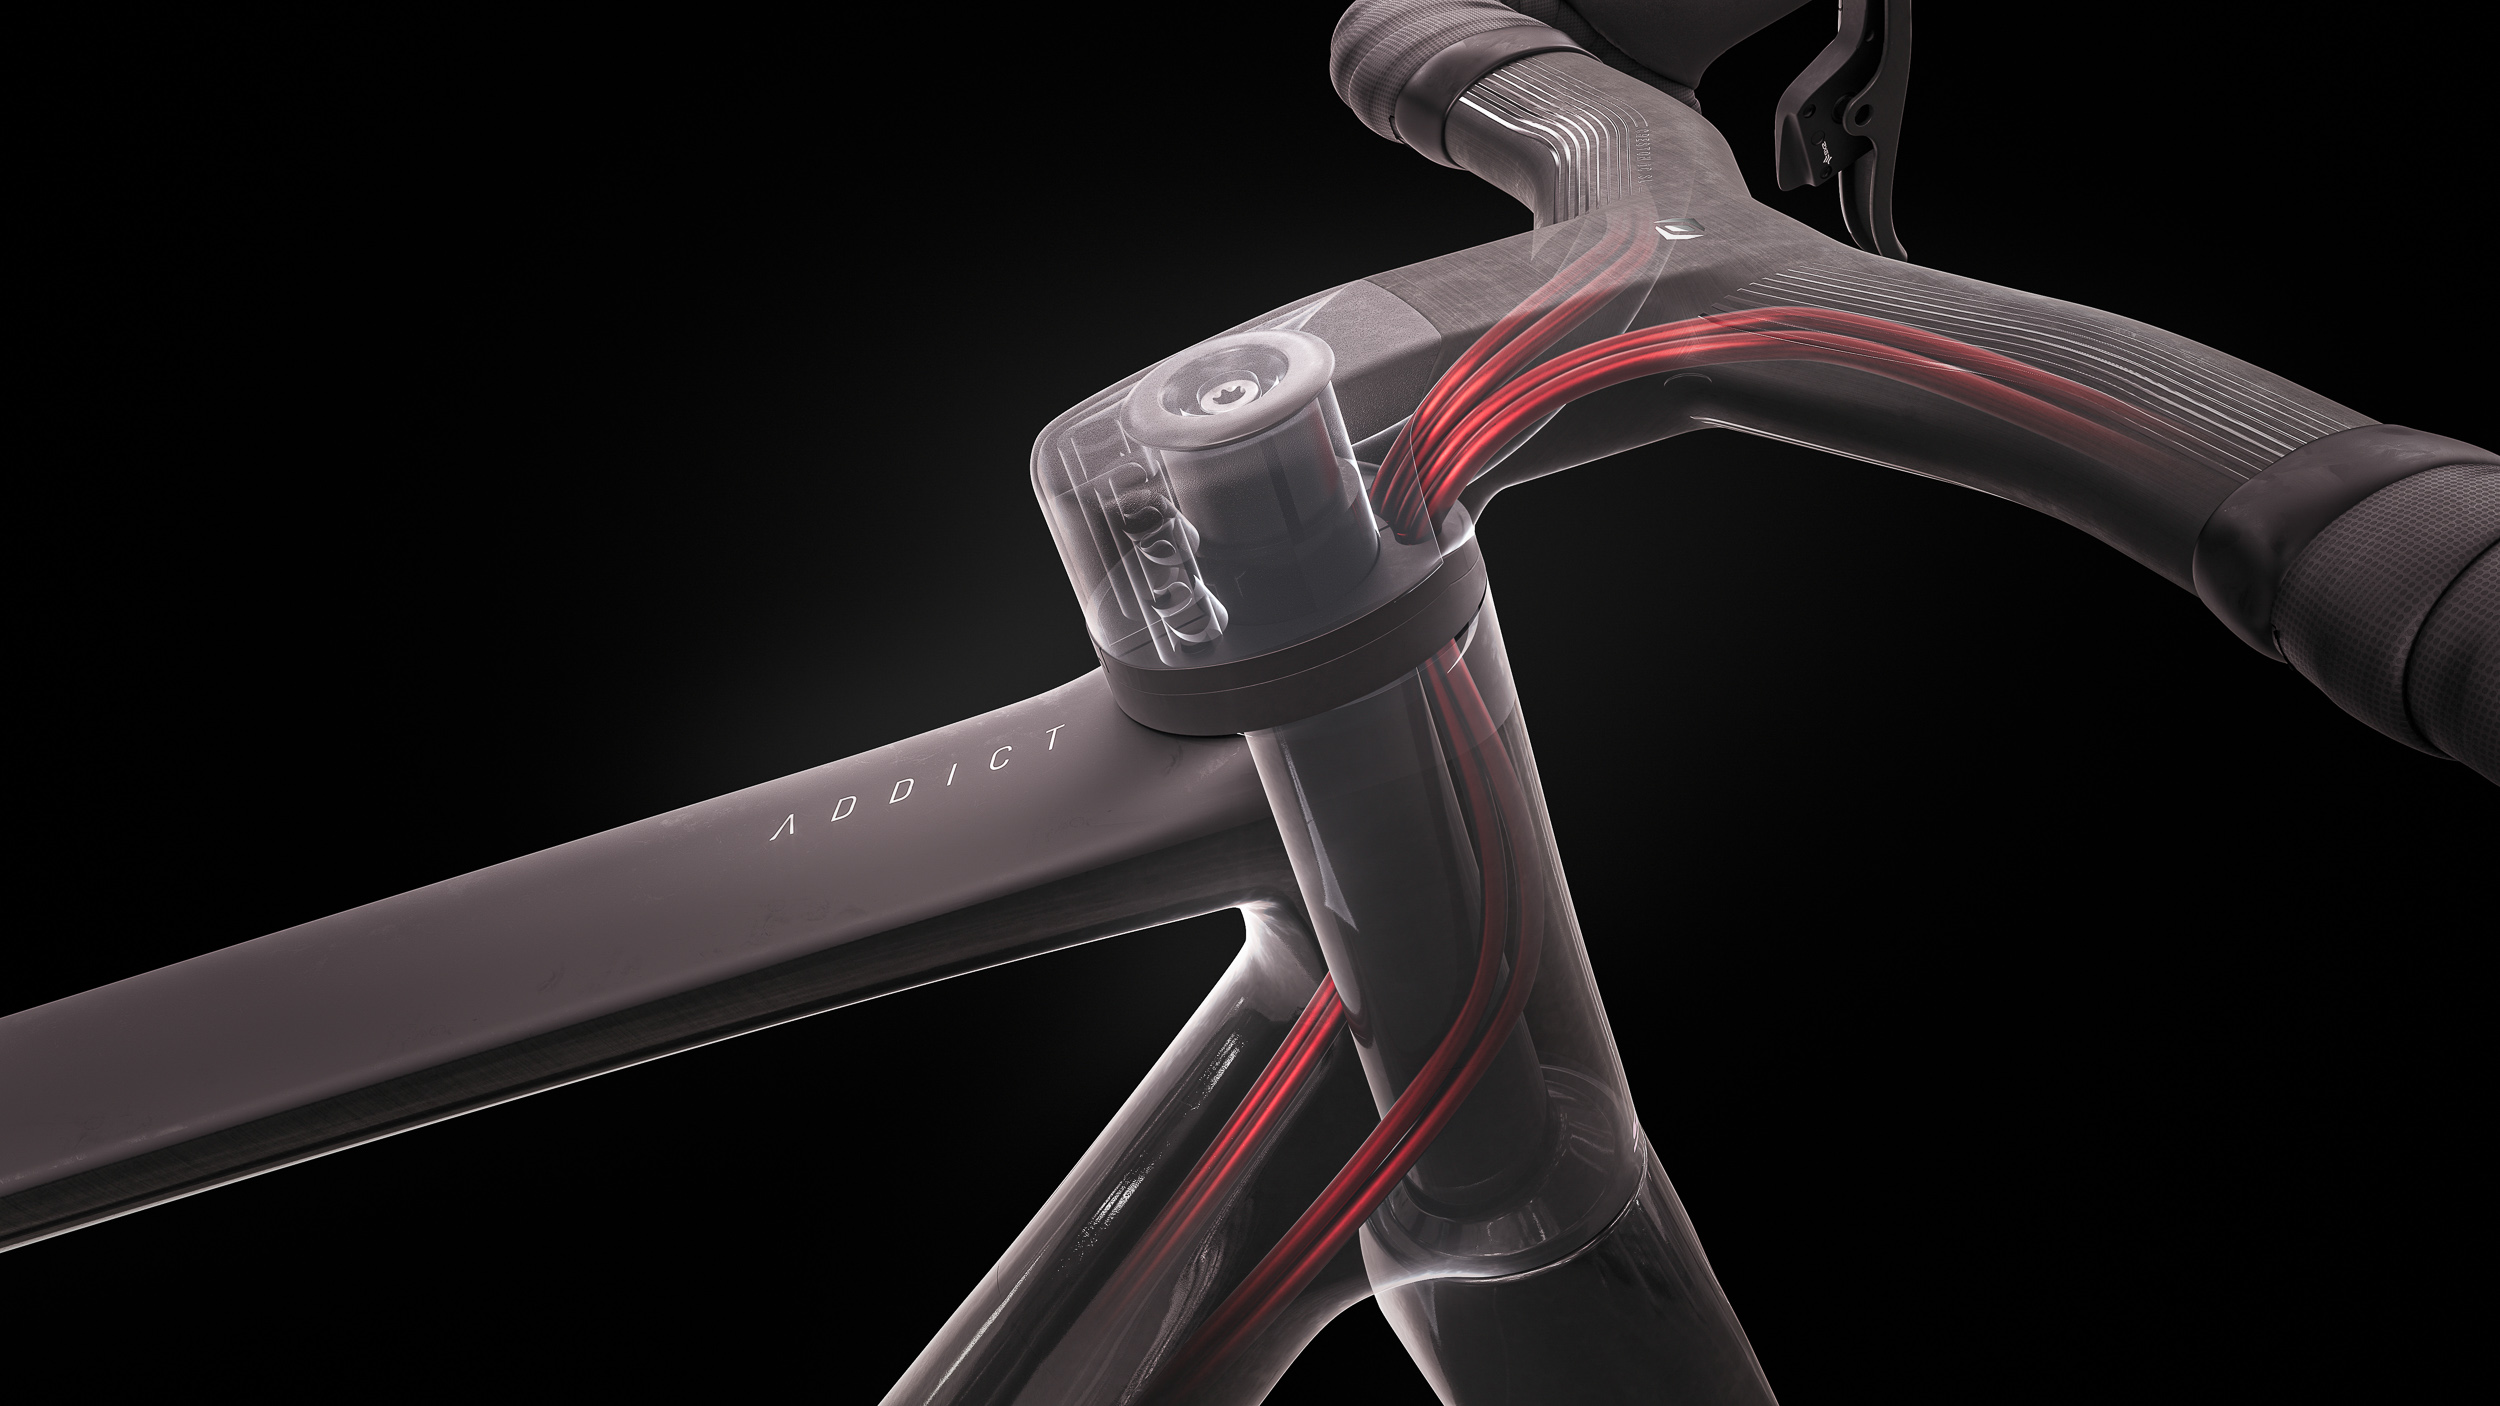 Scott's patented "Eccentric bicycle fork shaft" creates space for all lines and cables